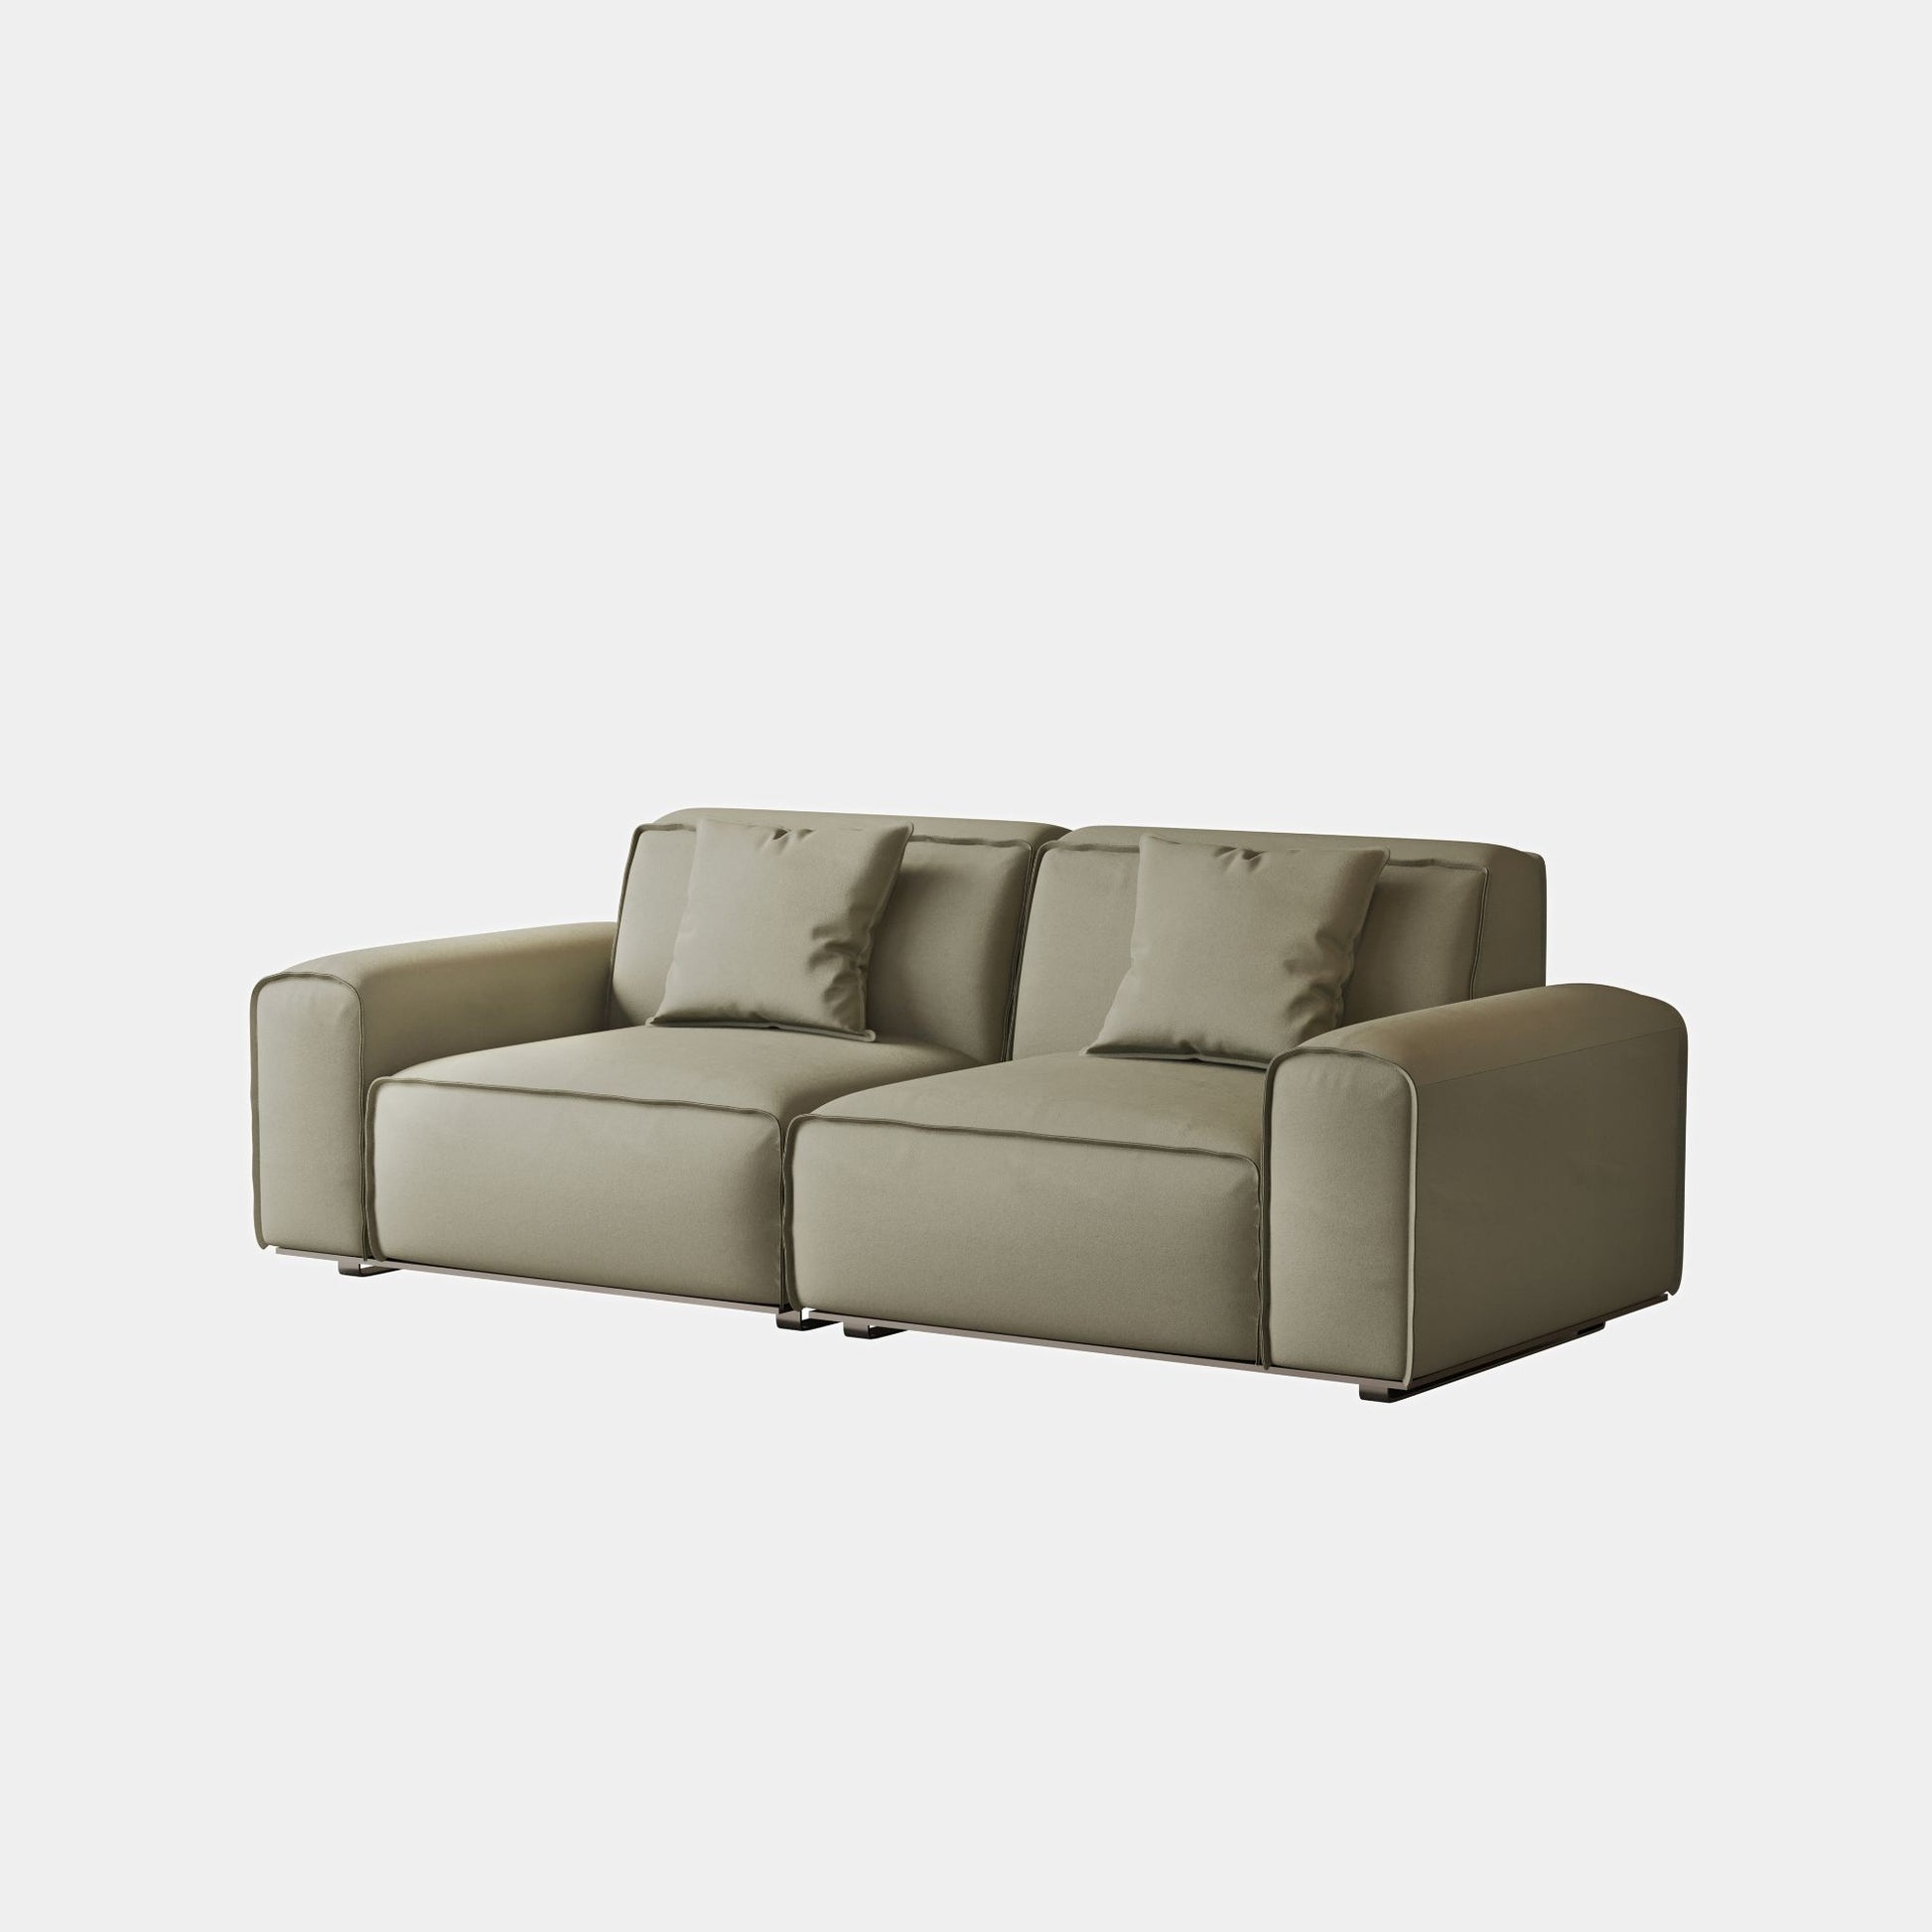 Colby white top grain half leather 2 seat sofa